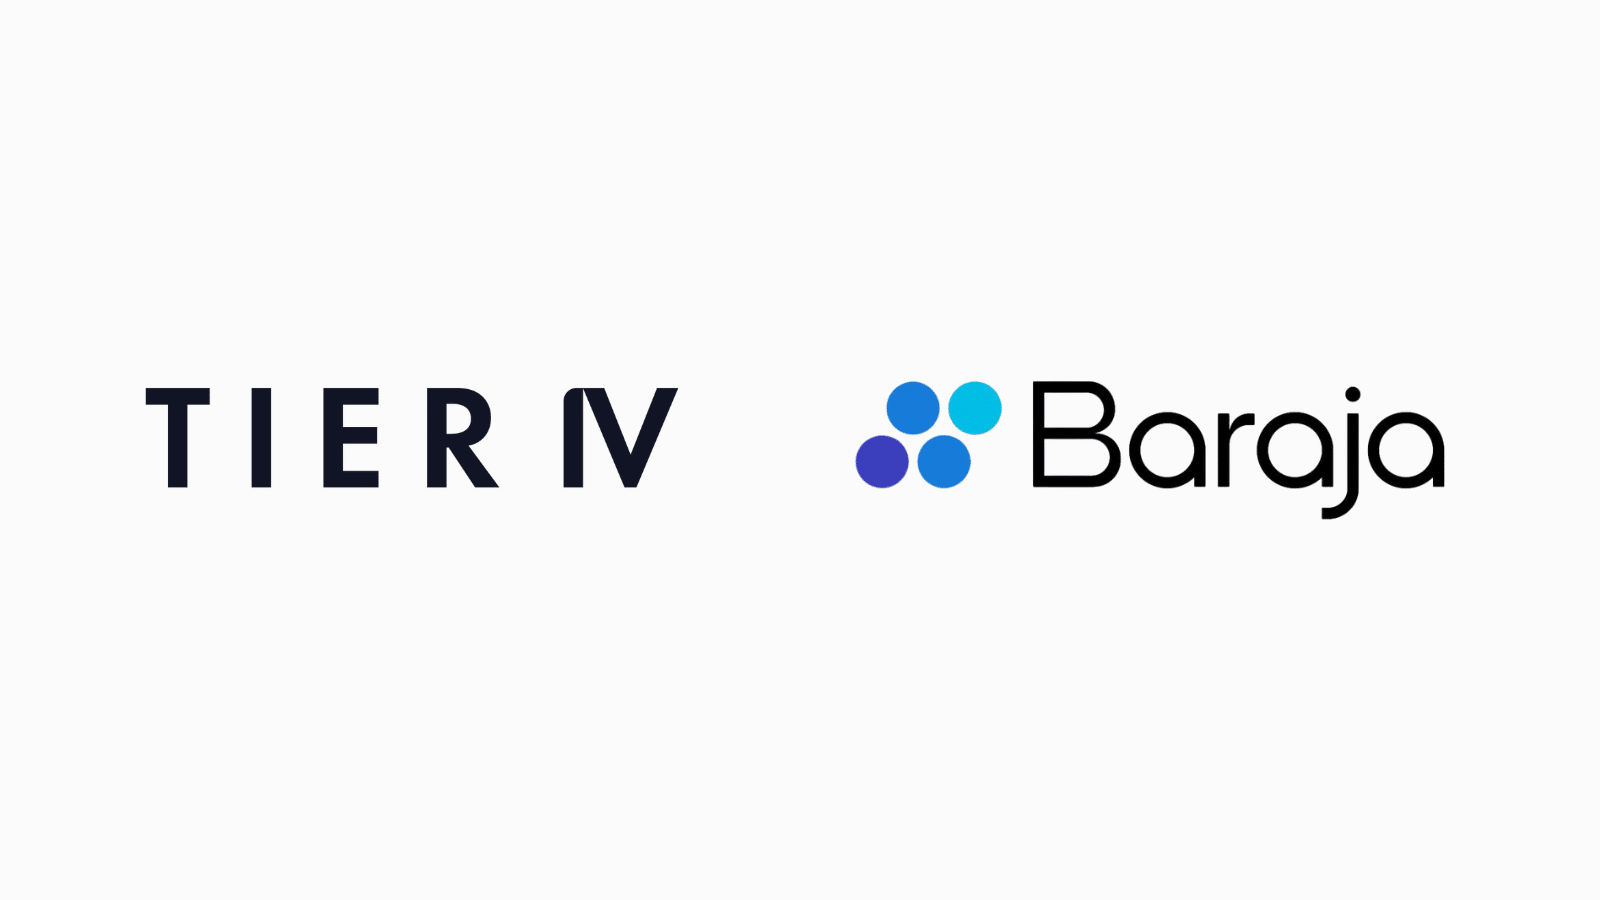 TIER IV and Baraja strengthen collaboration